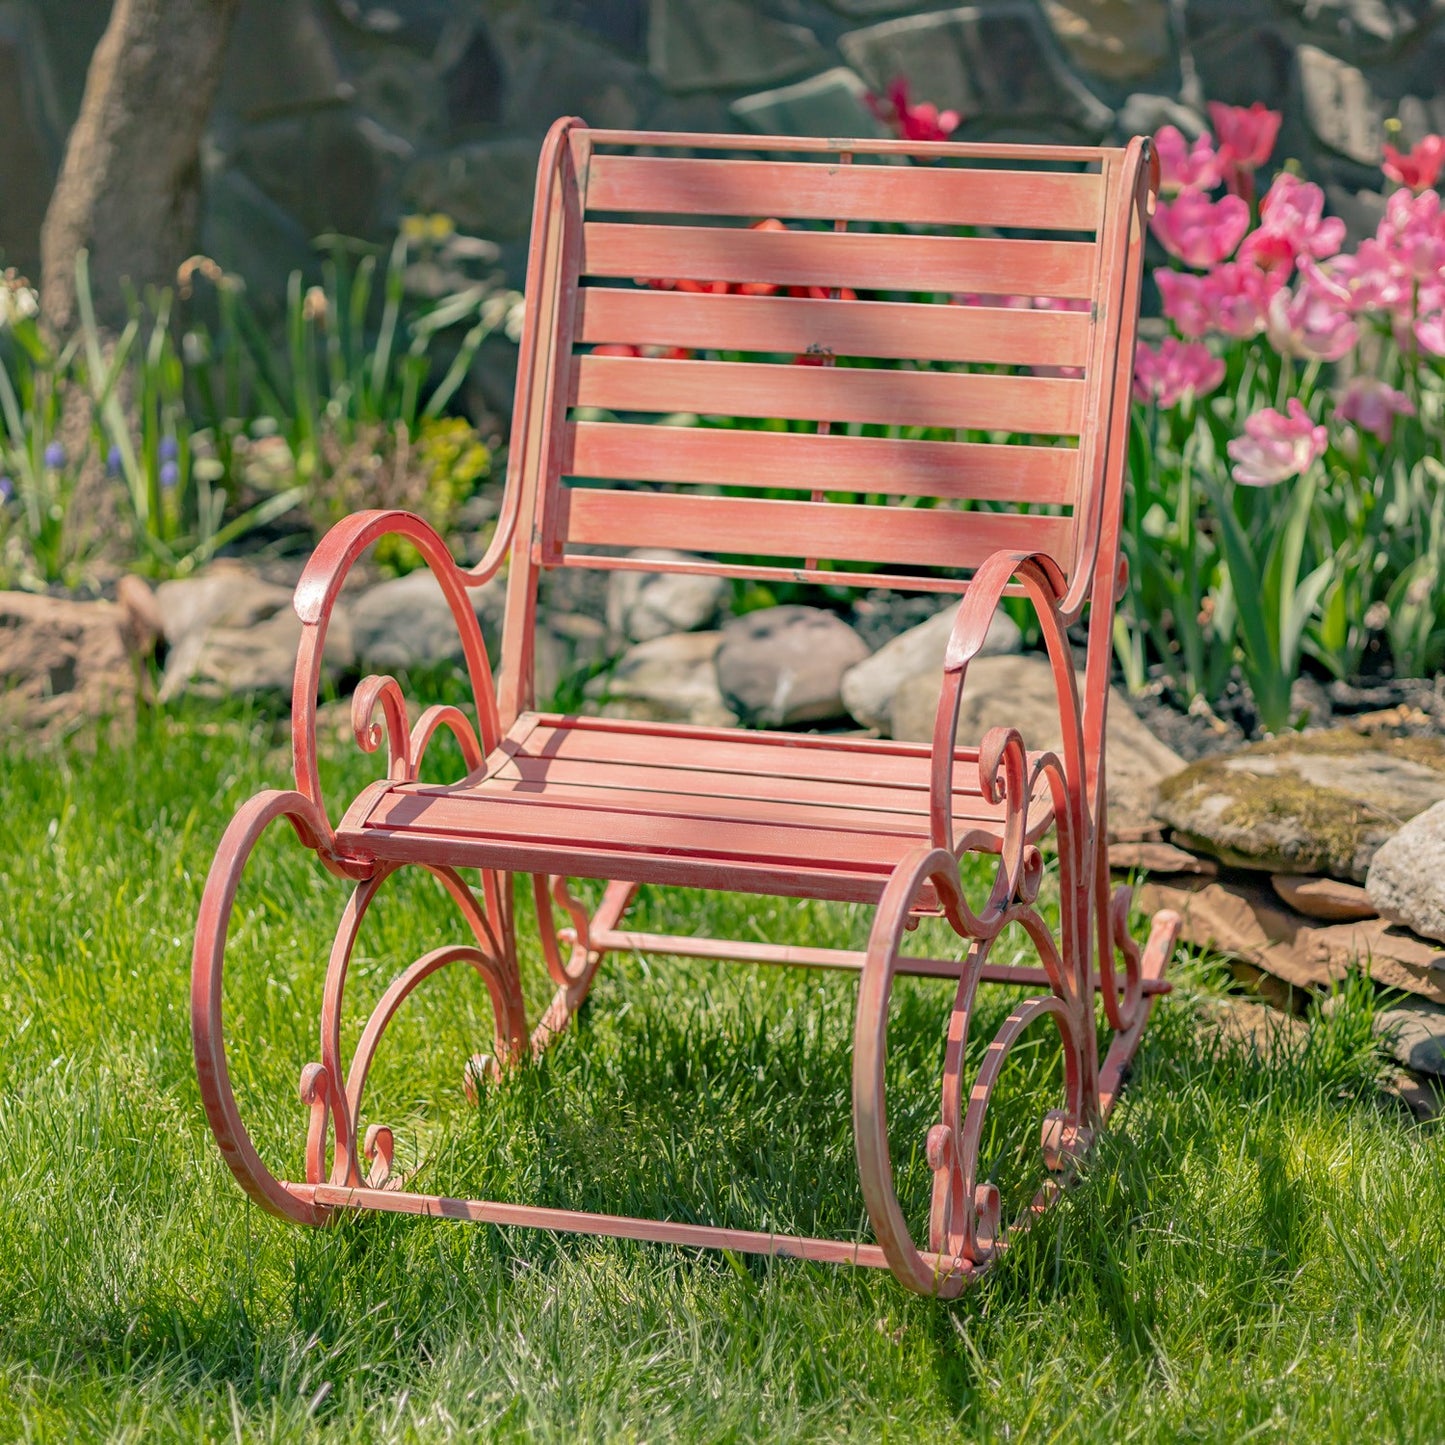 Monte Carlo 1968 Iron Rocking Arm Chair in Flamingo Pink